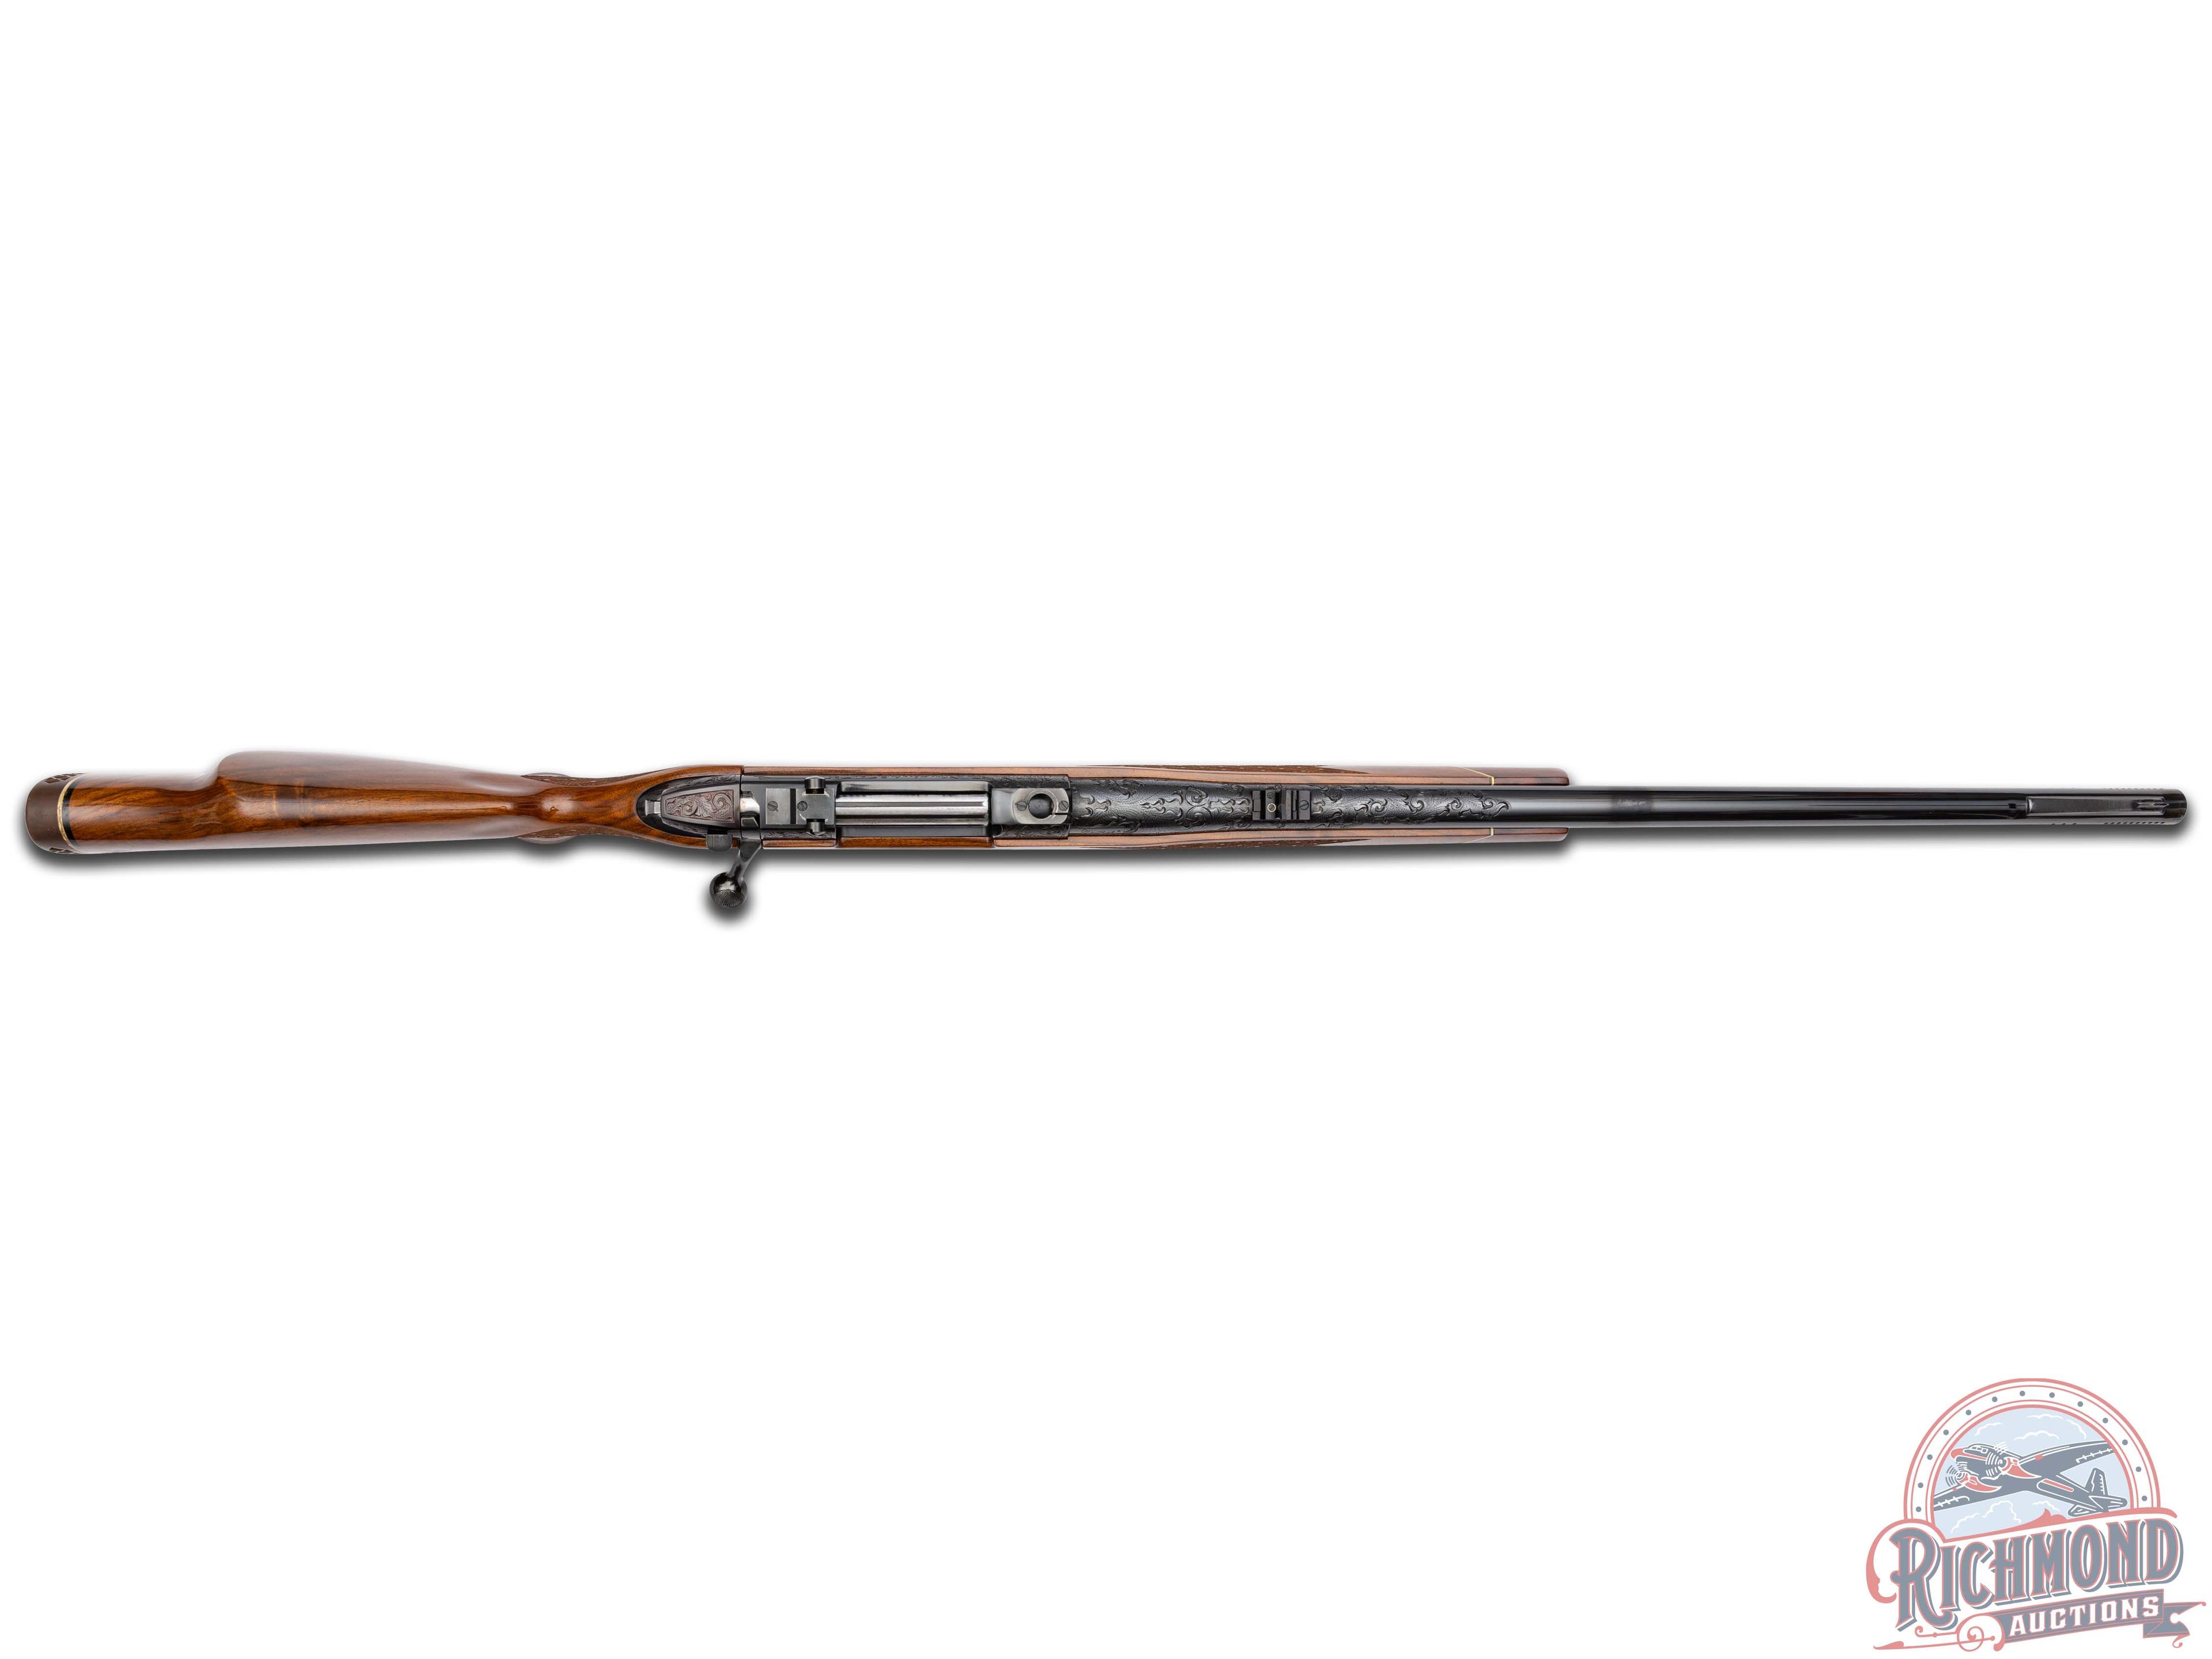 Weatherby West German Mark V Engraved at Custom Shop South Gate .460 WBY Mag Bolt Action Rifle